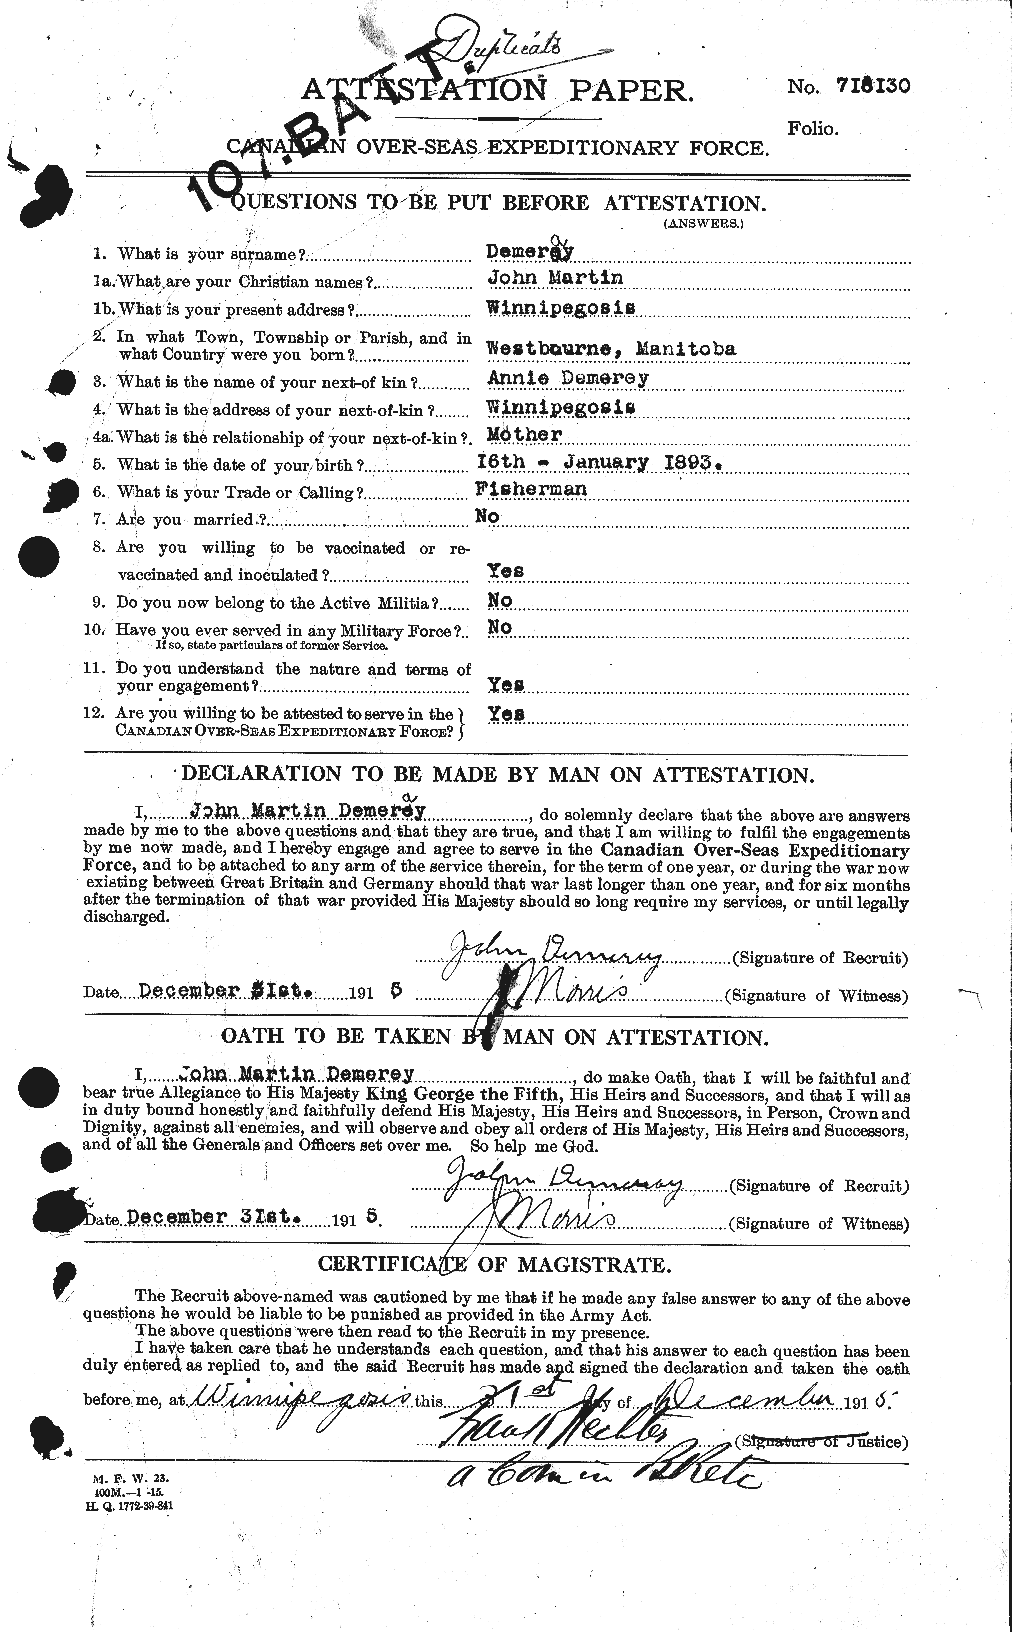 Personnel Records of the First World War - CEF 287830a